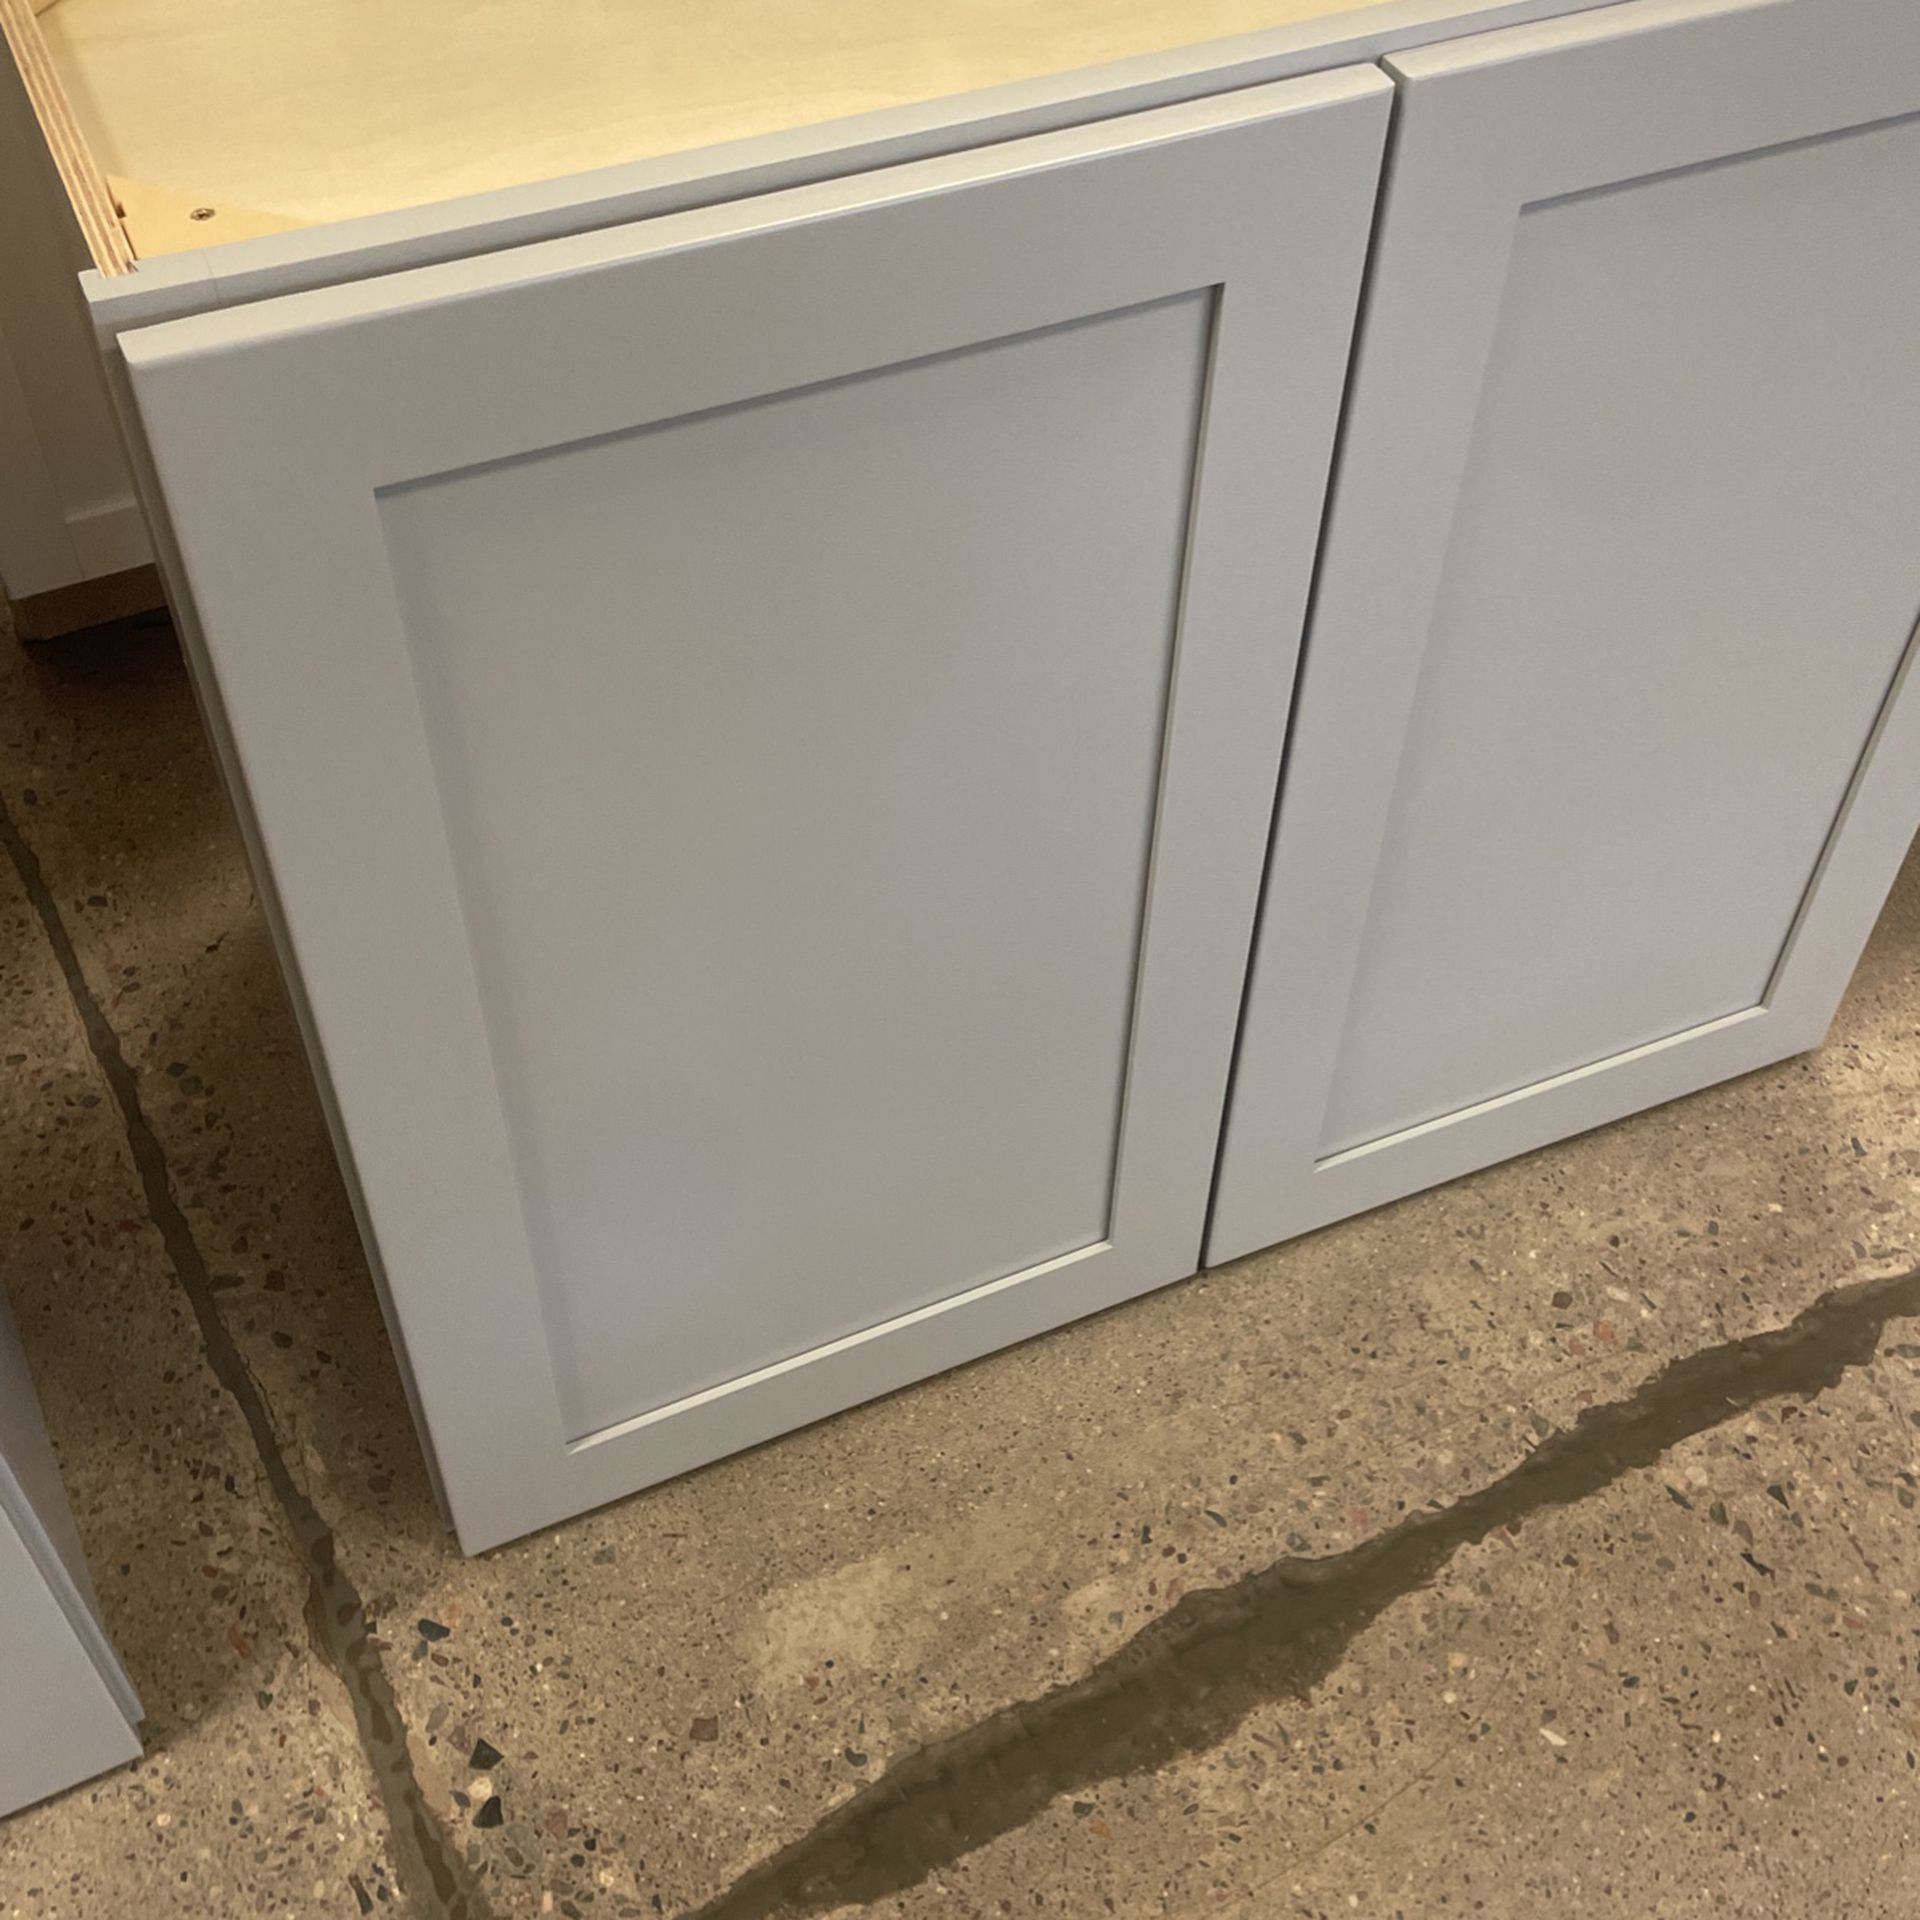 Hampton Bay Avondale Shaker Dove Gray Ready to Assemble Plywood 36 in Wall Cabinet (36 in W x 30 in H x 12 in D)